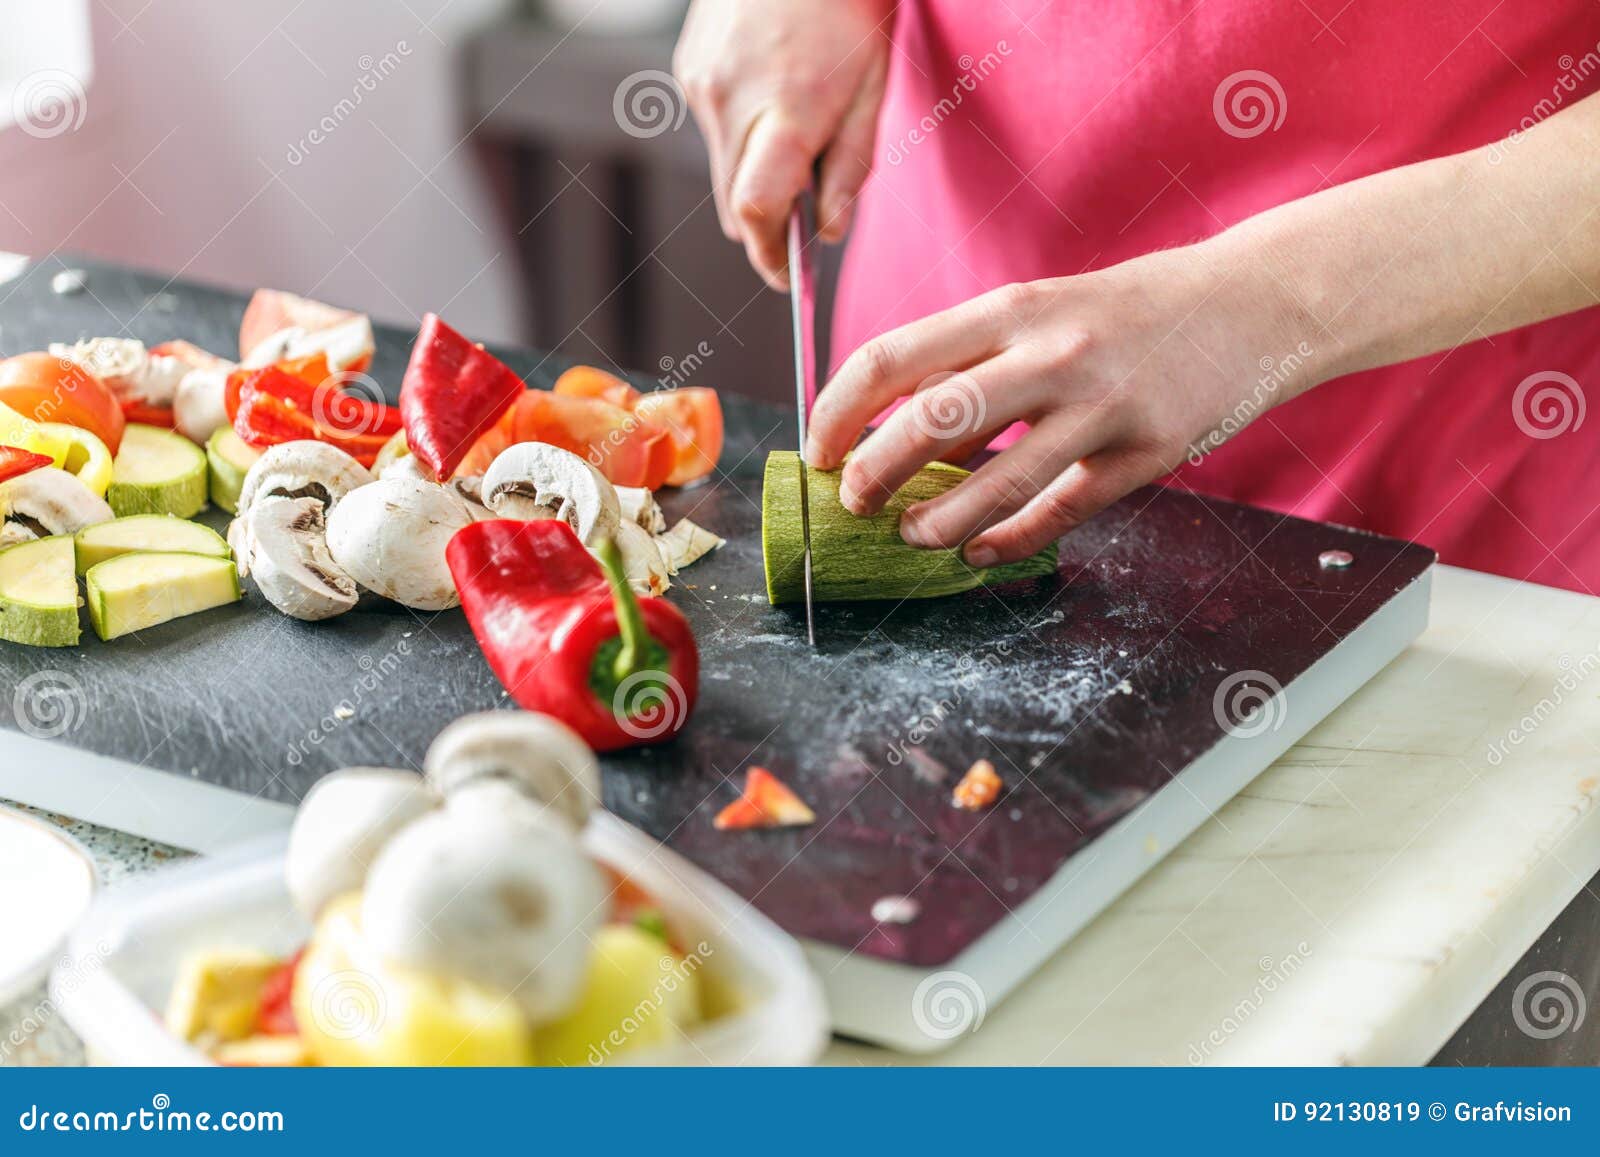 chef is chopping vegetables